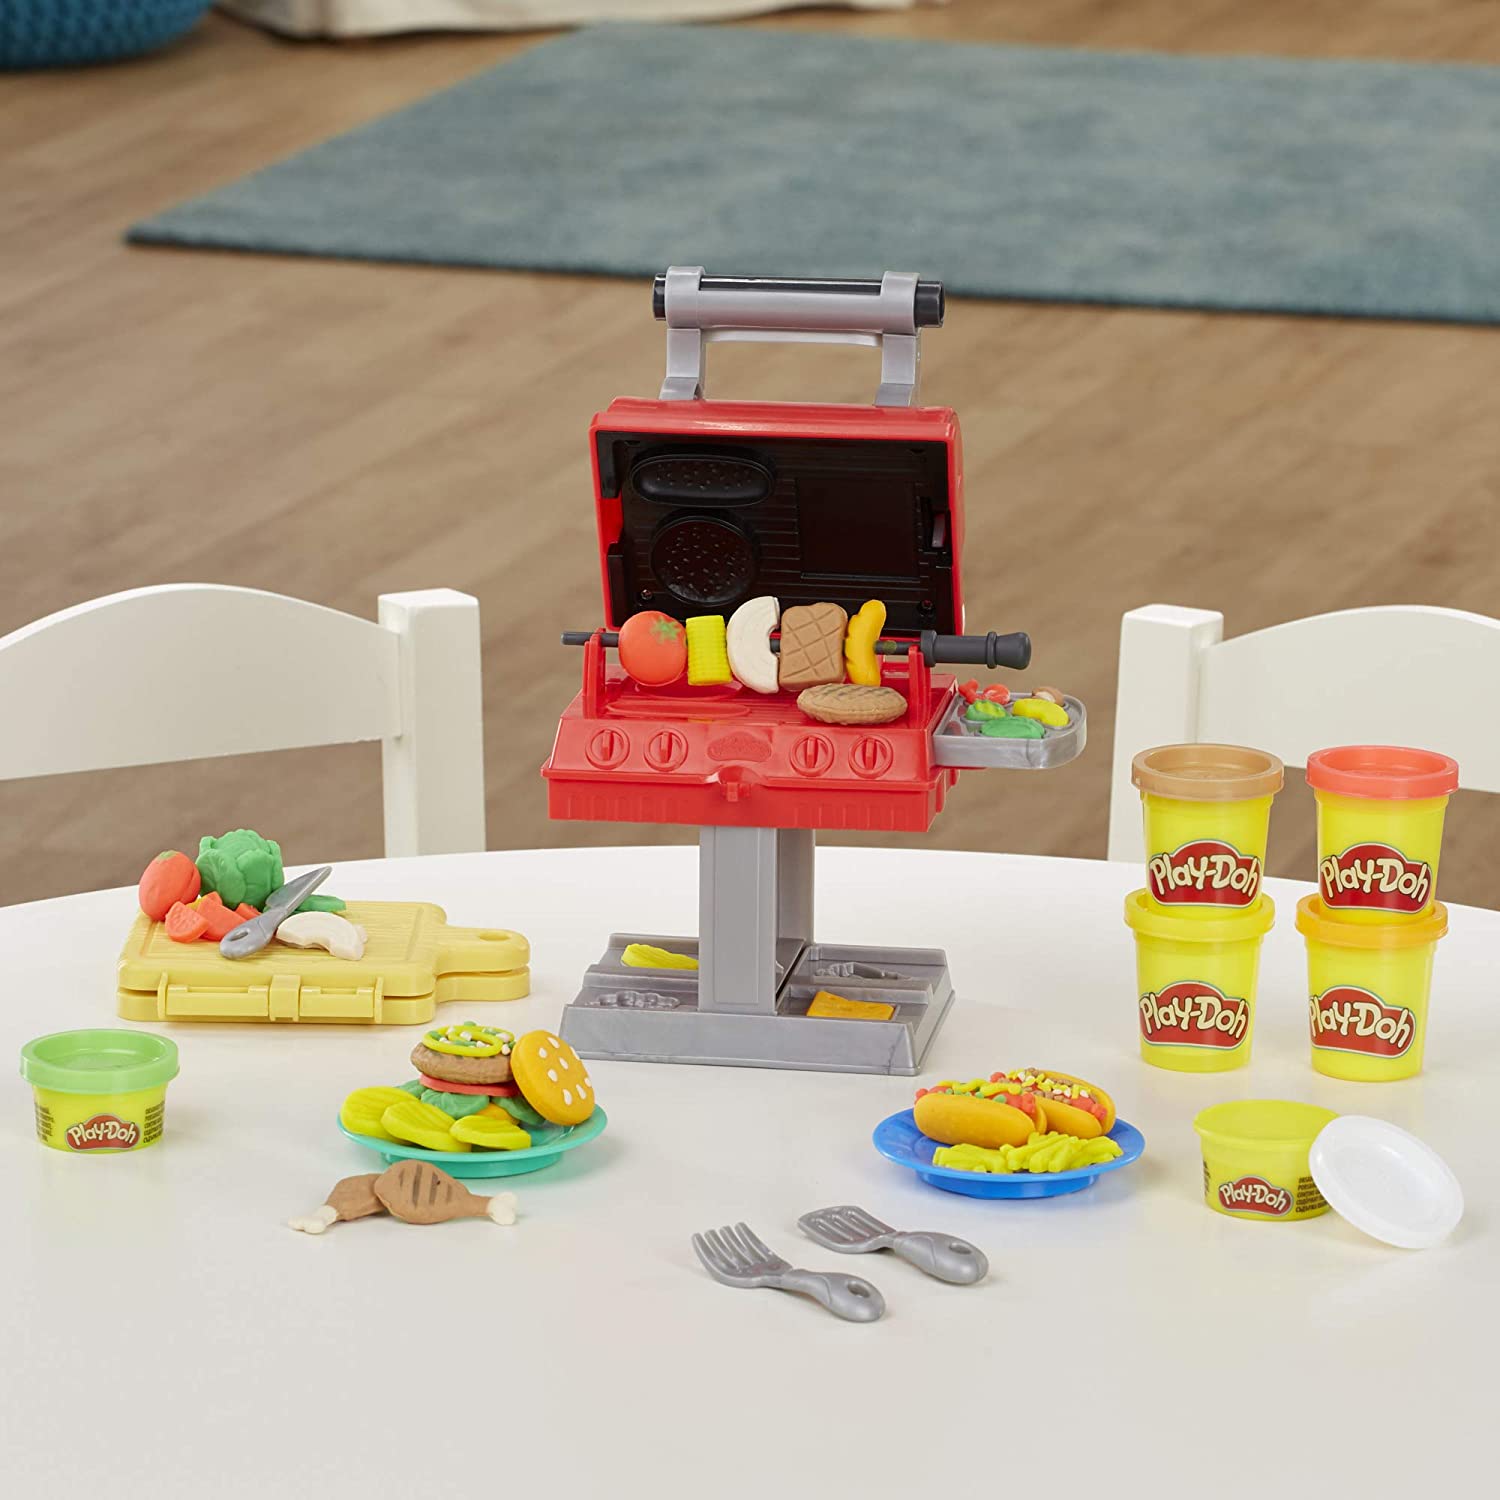 Play Doh Grill n Stamp Playset